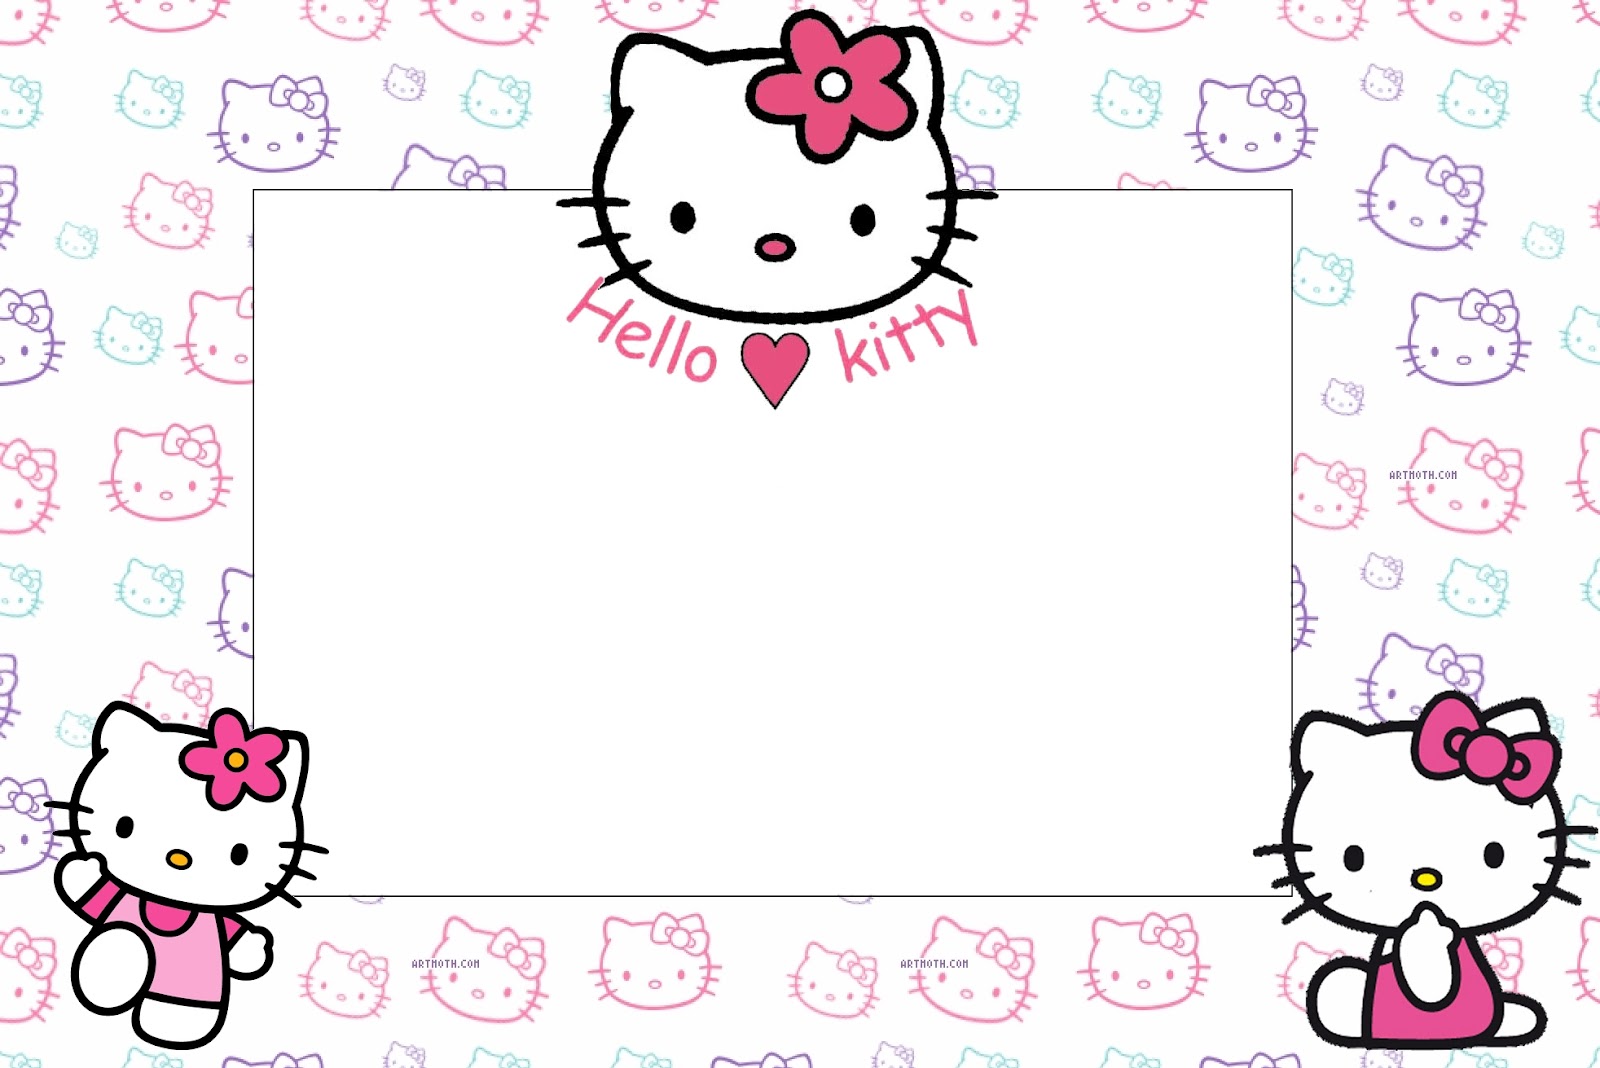 hello-kitty-party-free-printable-invitations-oh-my-fiesta-in-english